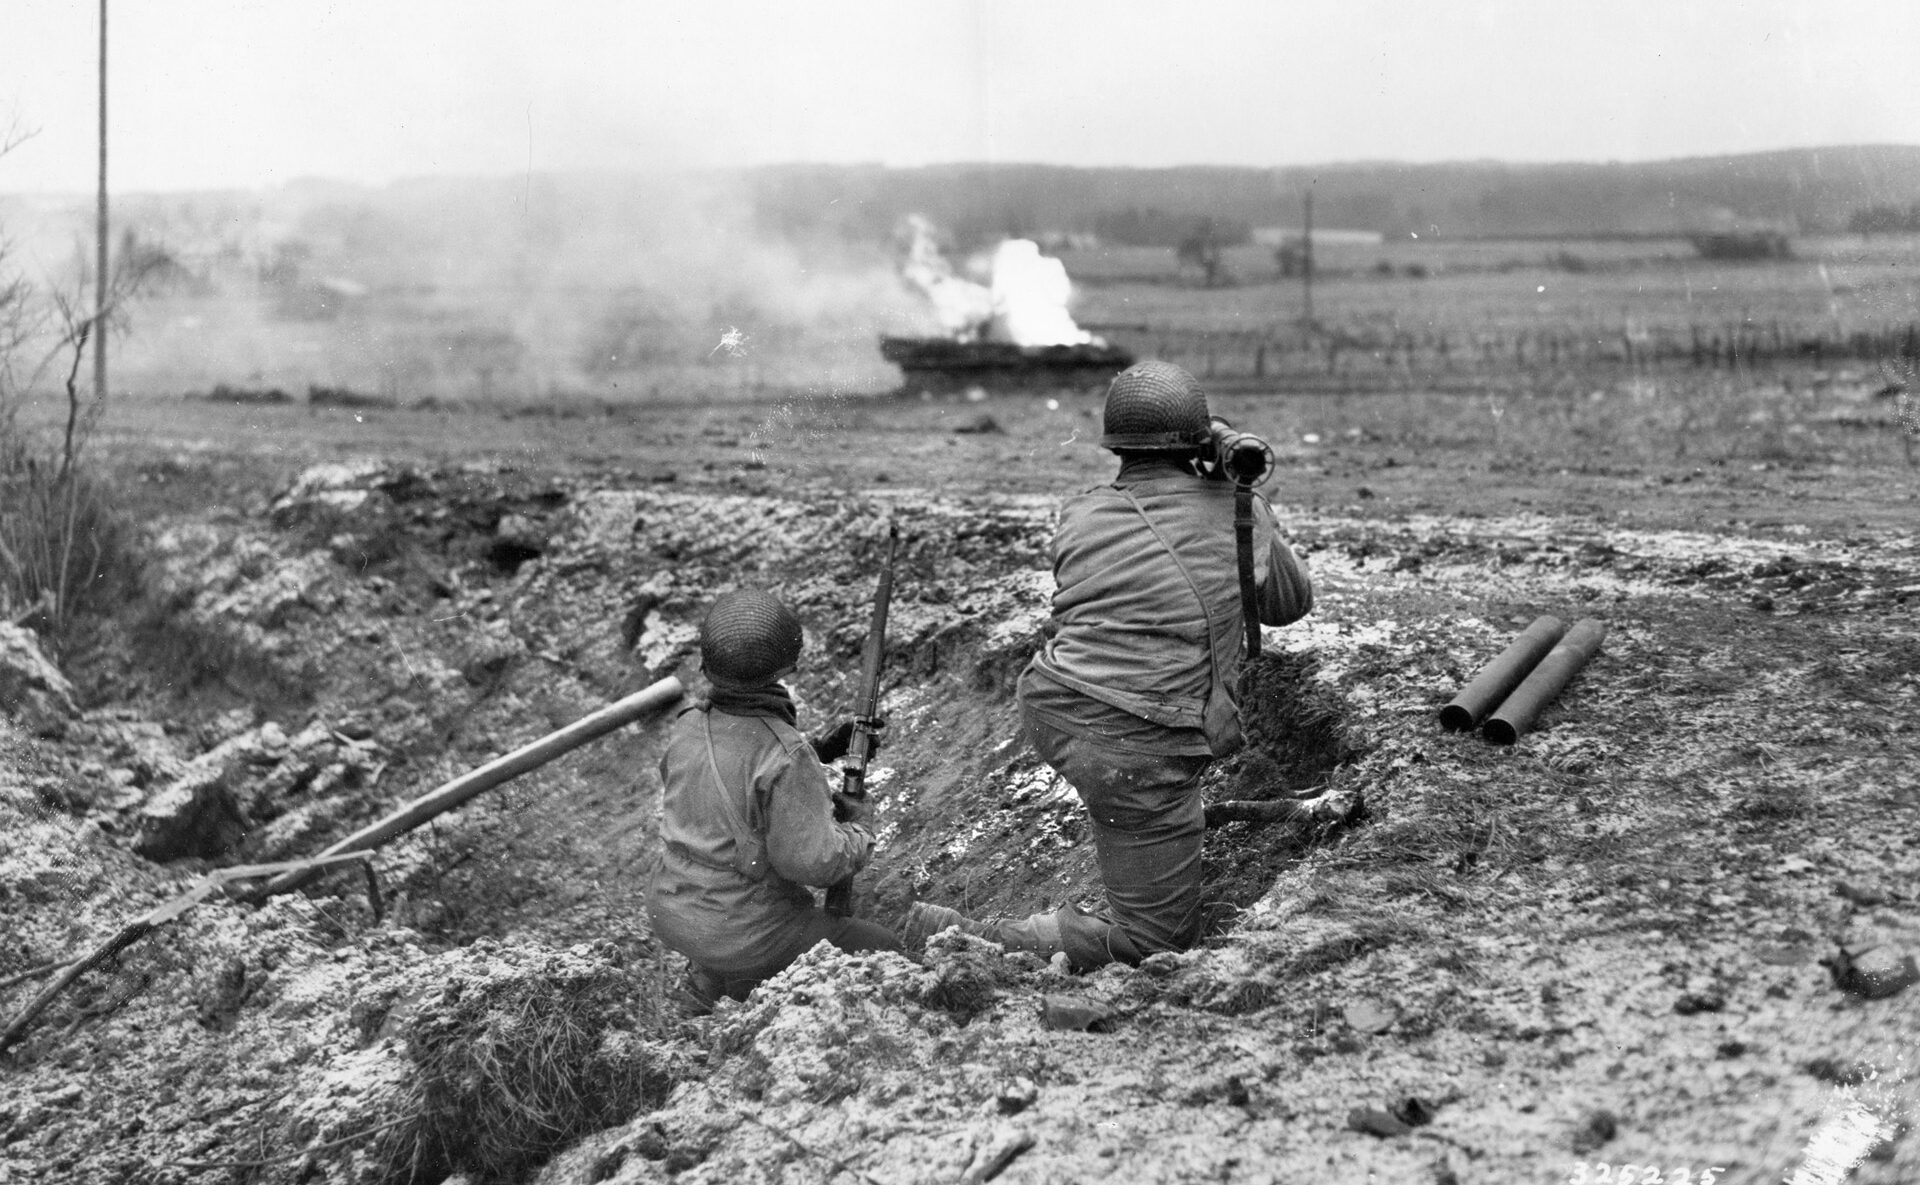 Bush fired a bazooka round at a German tank but it bounced off harmlessly. One of his fellow soldiers managed to halt the tank by blowing off one of its tracks. 